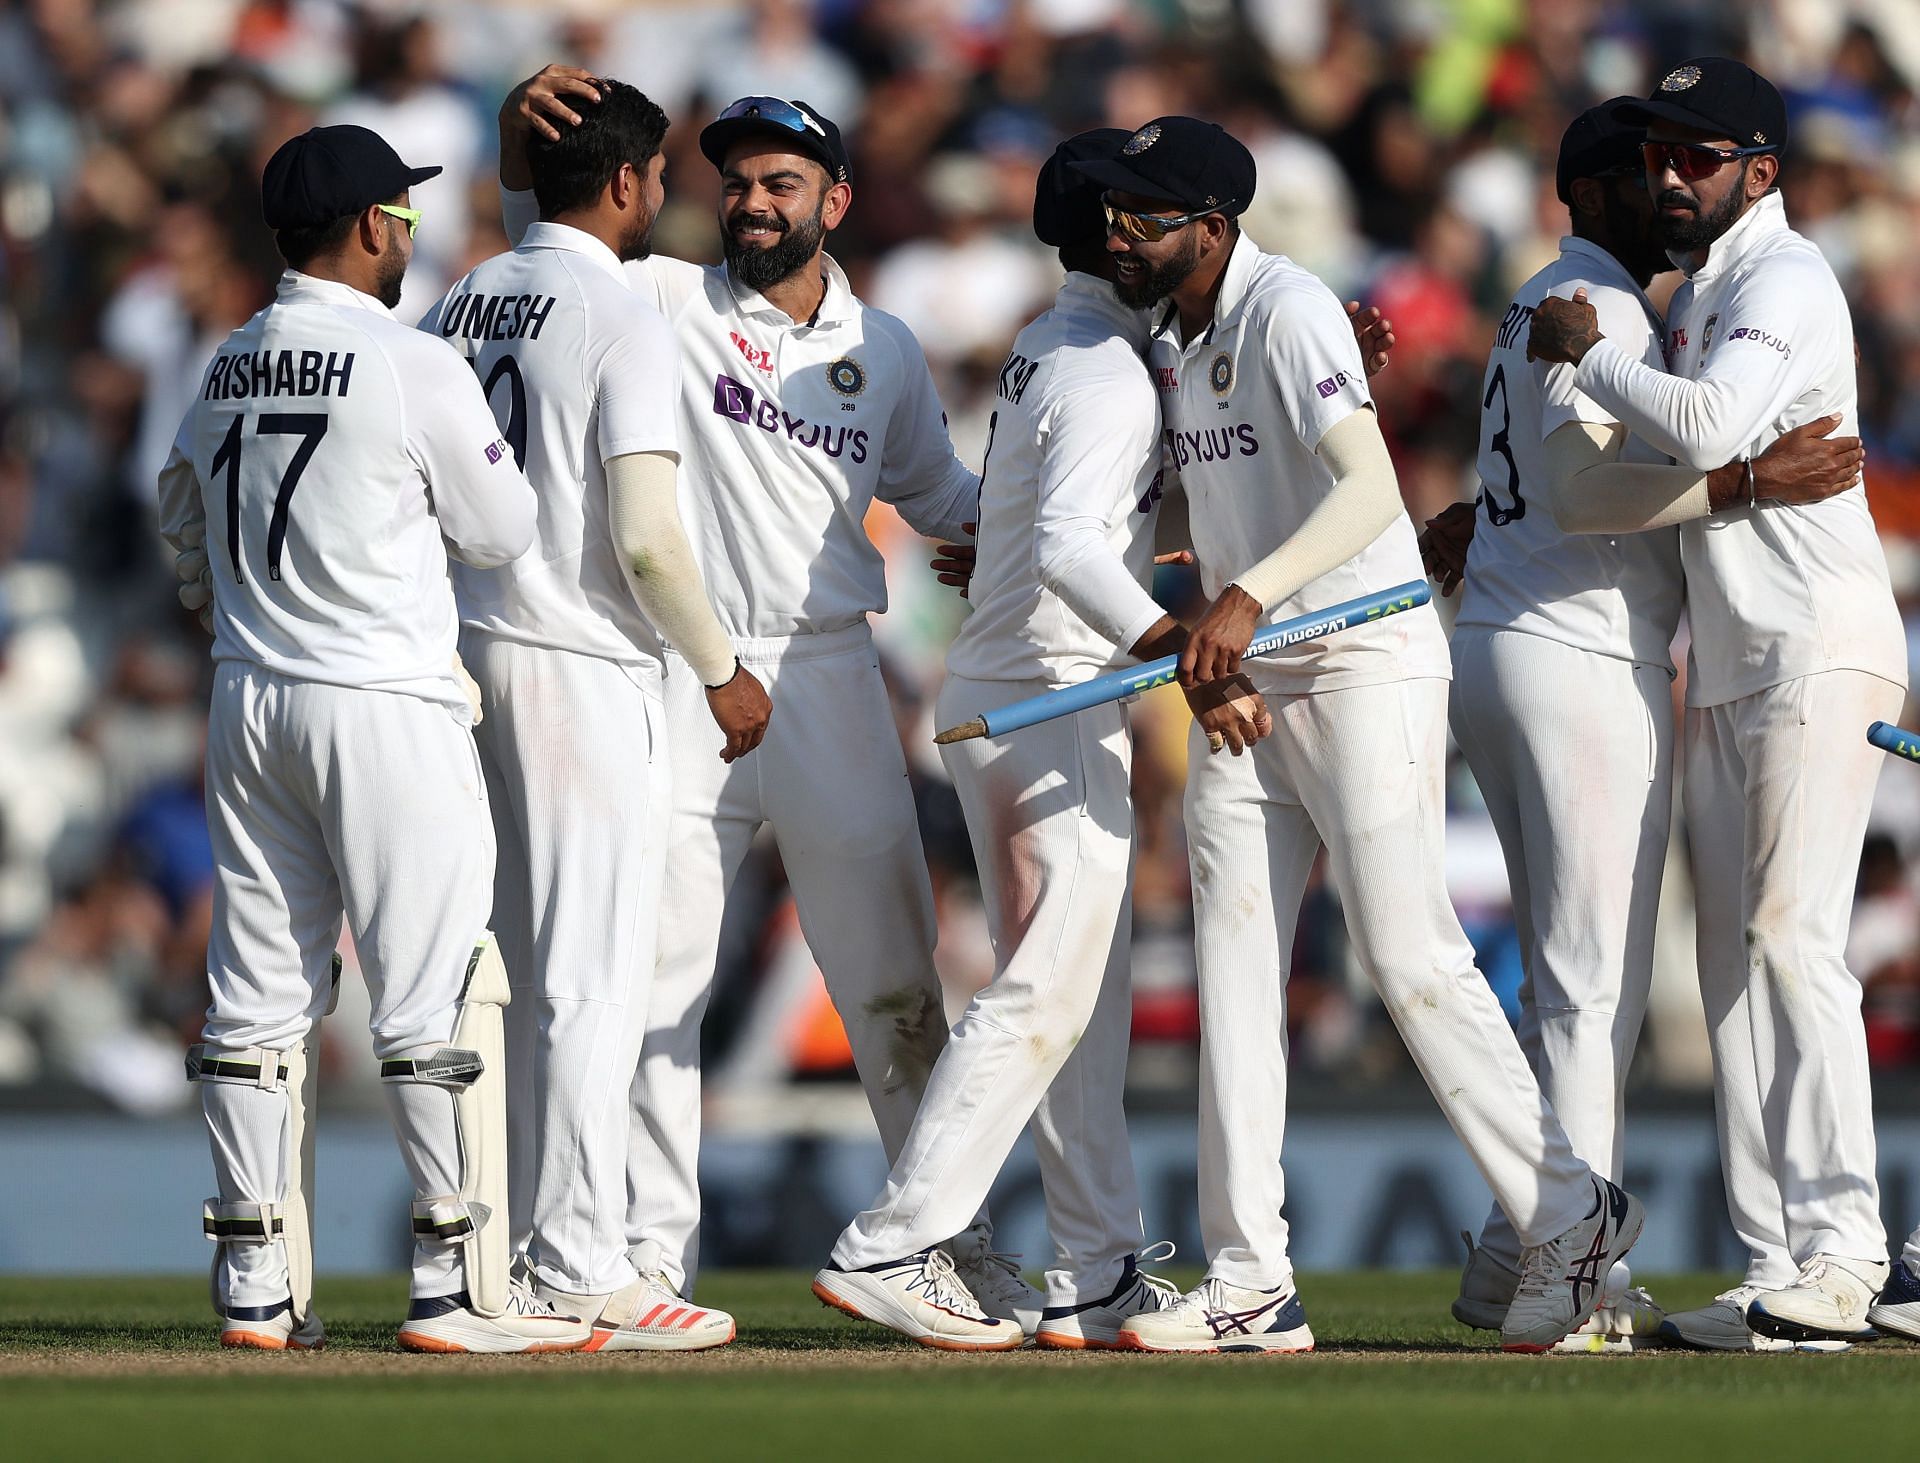 Team India celebrate after winning The Oval Test last year. Pic: Getty Images